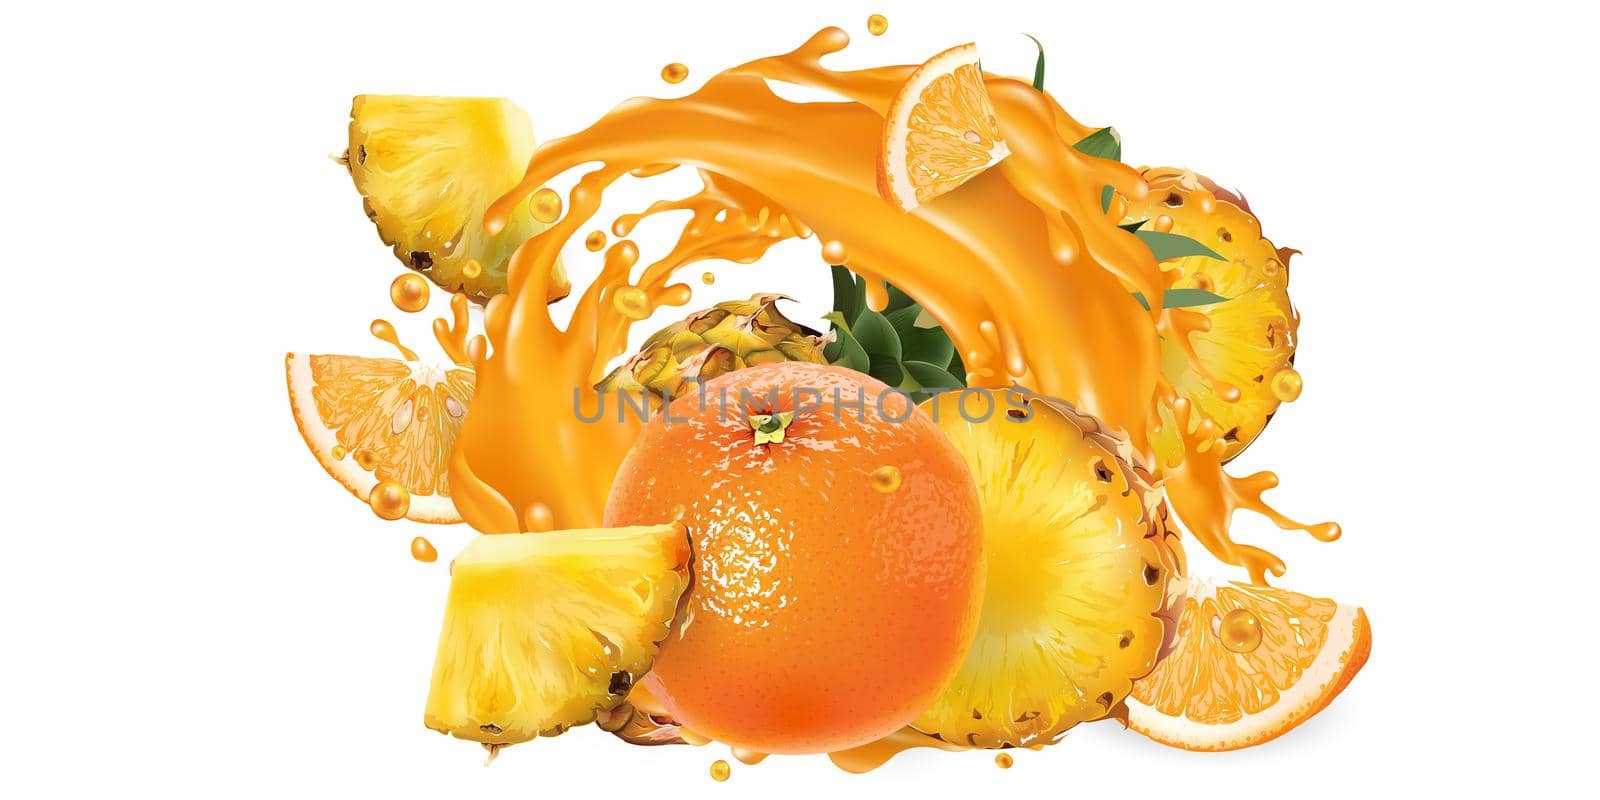 Pineapples and oranges in a juice splash. by ConceptCafe